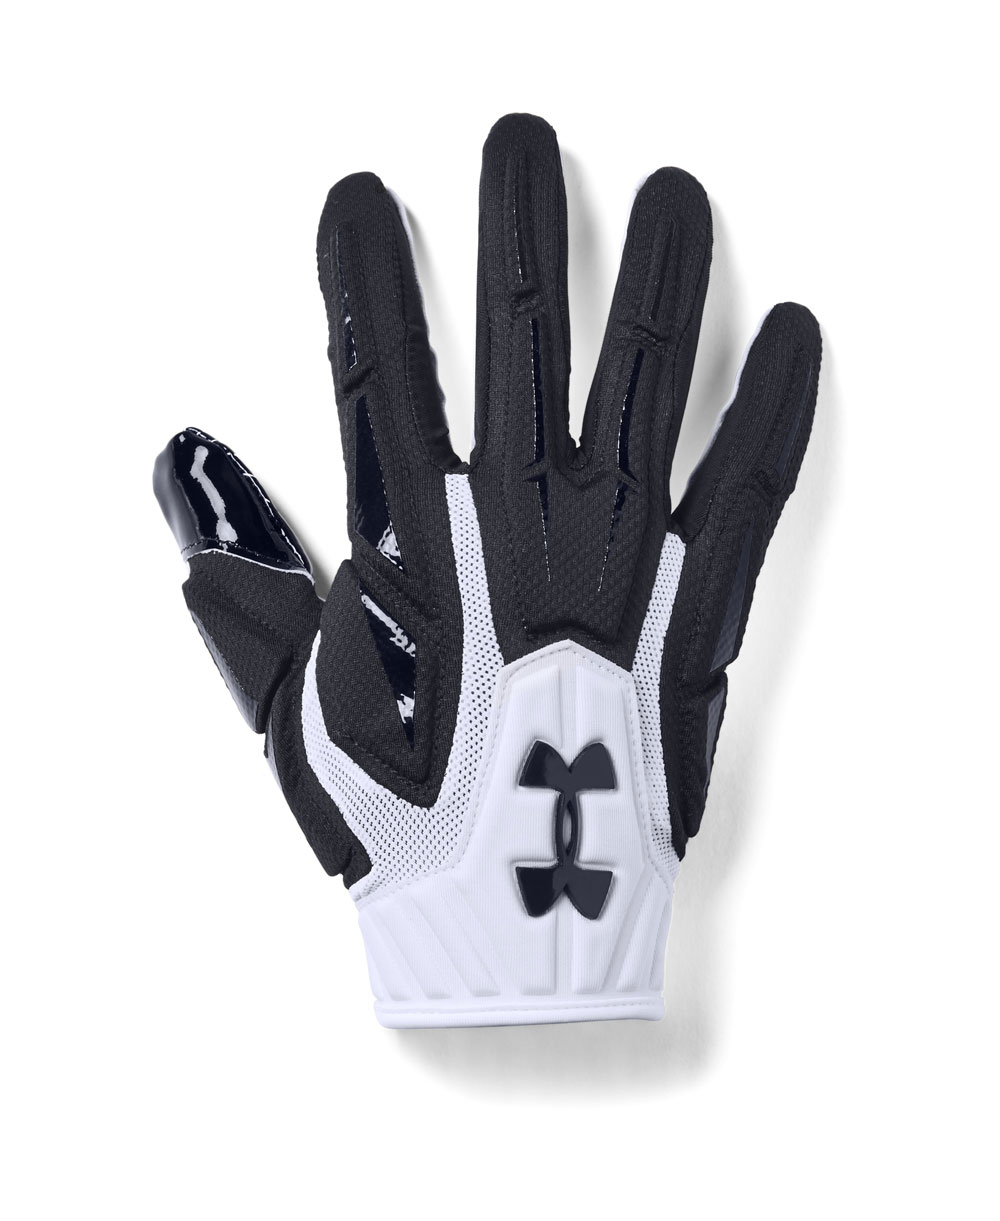 NEW UNDER ARMOUR Spotlight Limited Edition Football Gloves White Jade Size Large 